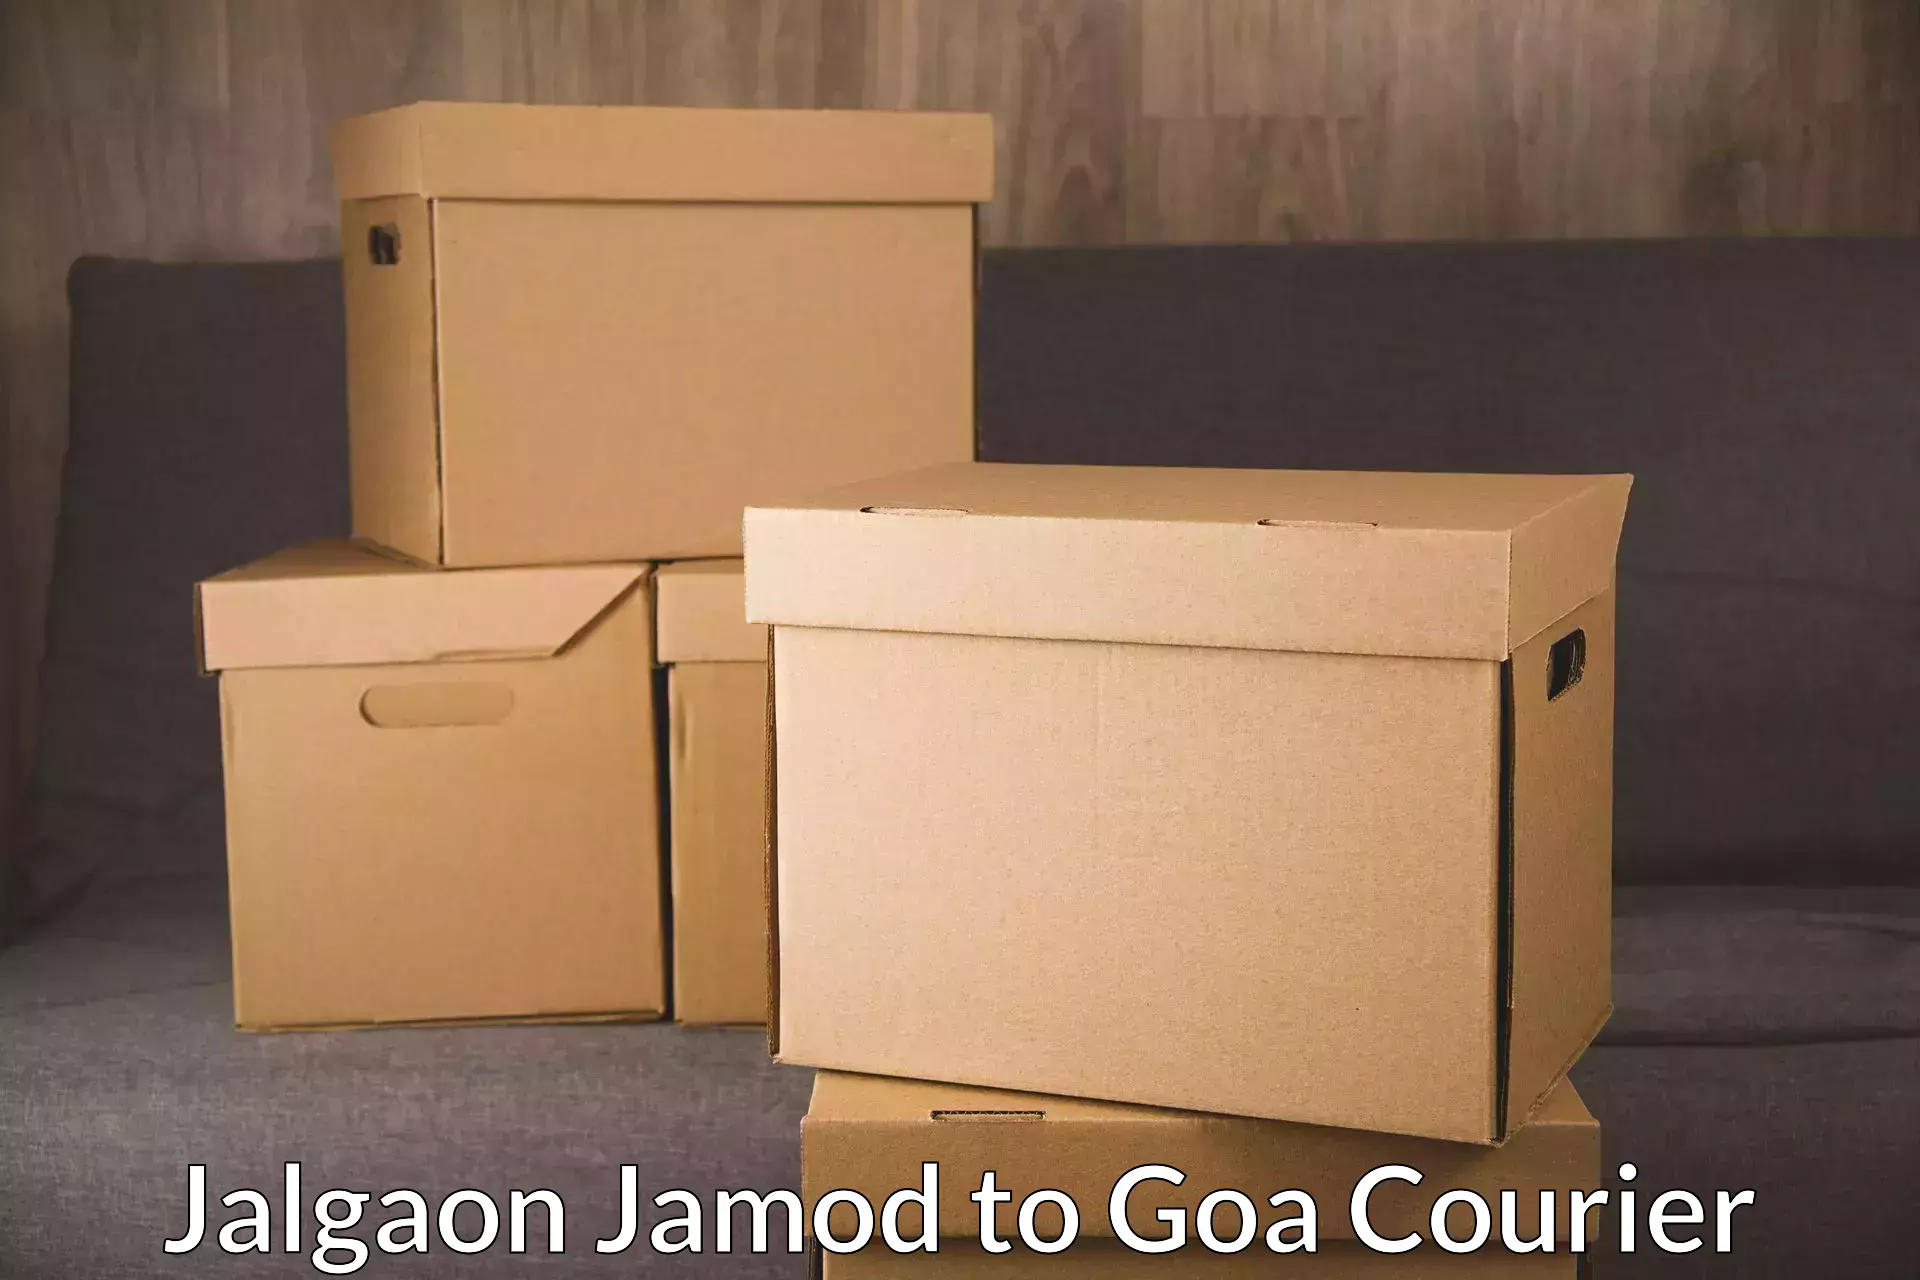 Overnight delivery services in Jalgaon Jamod to South Goa